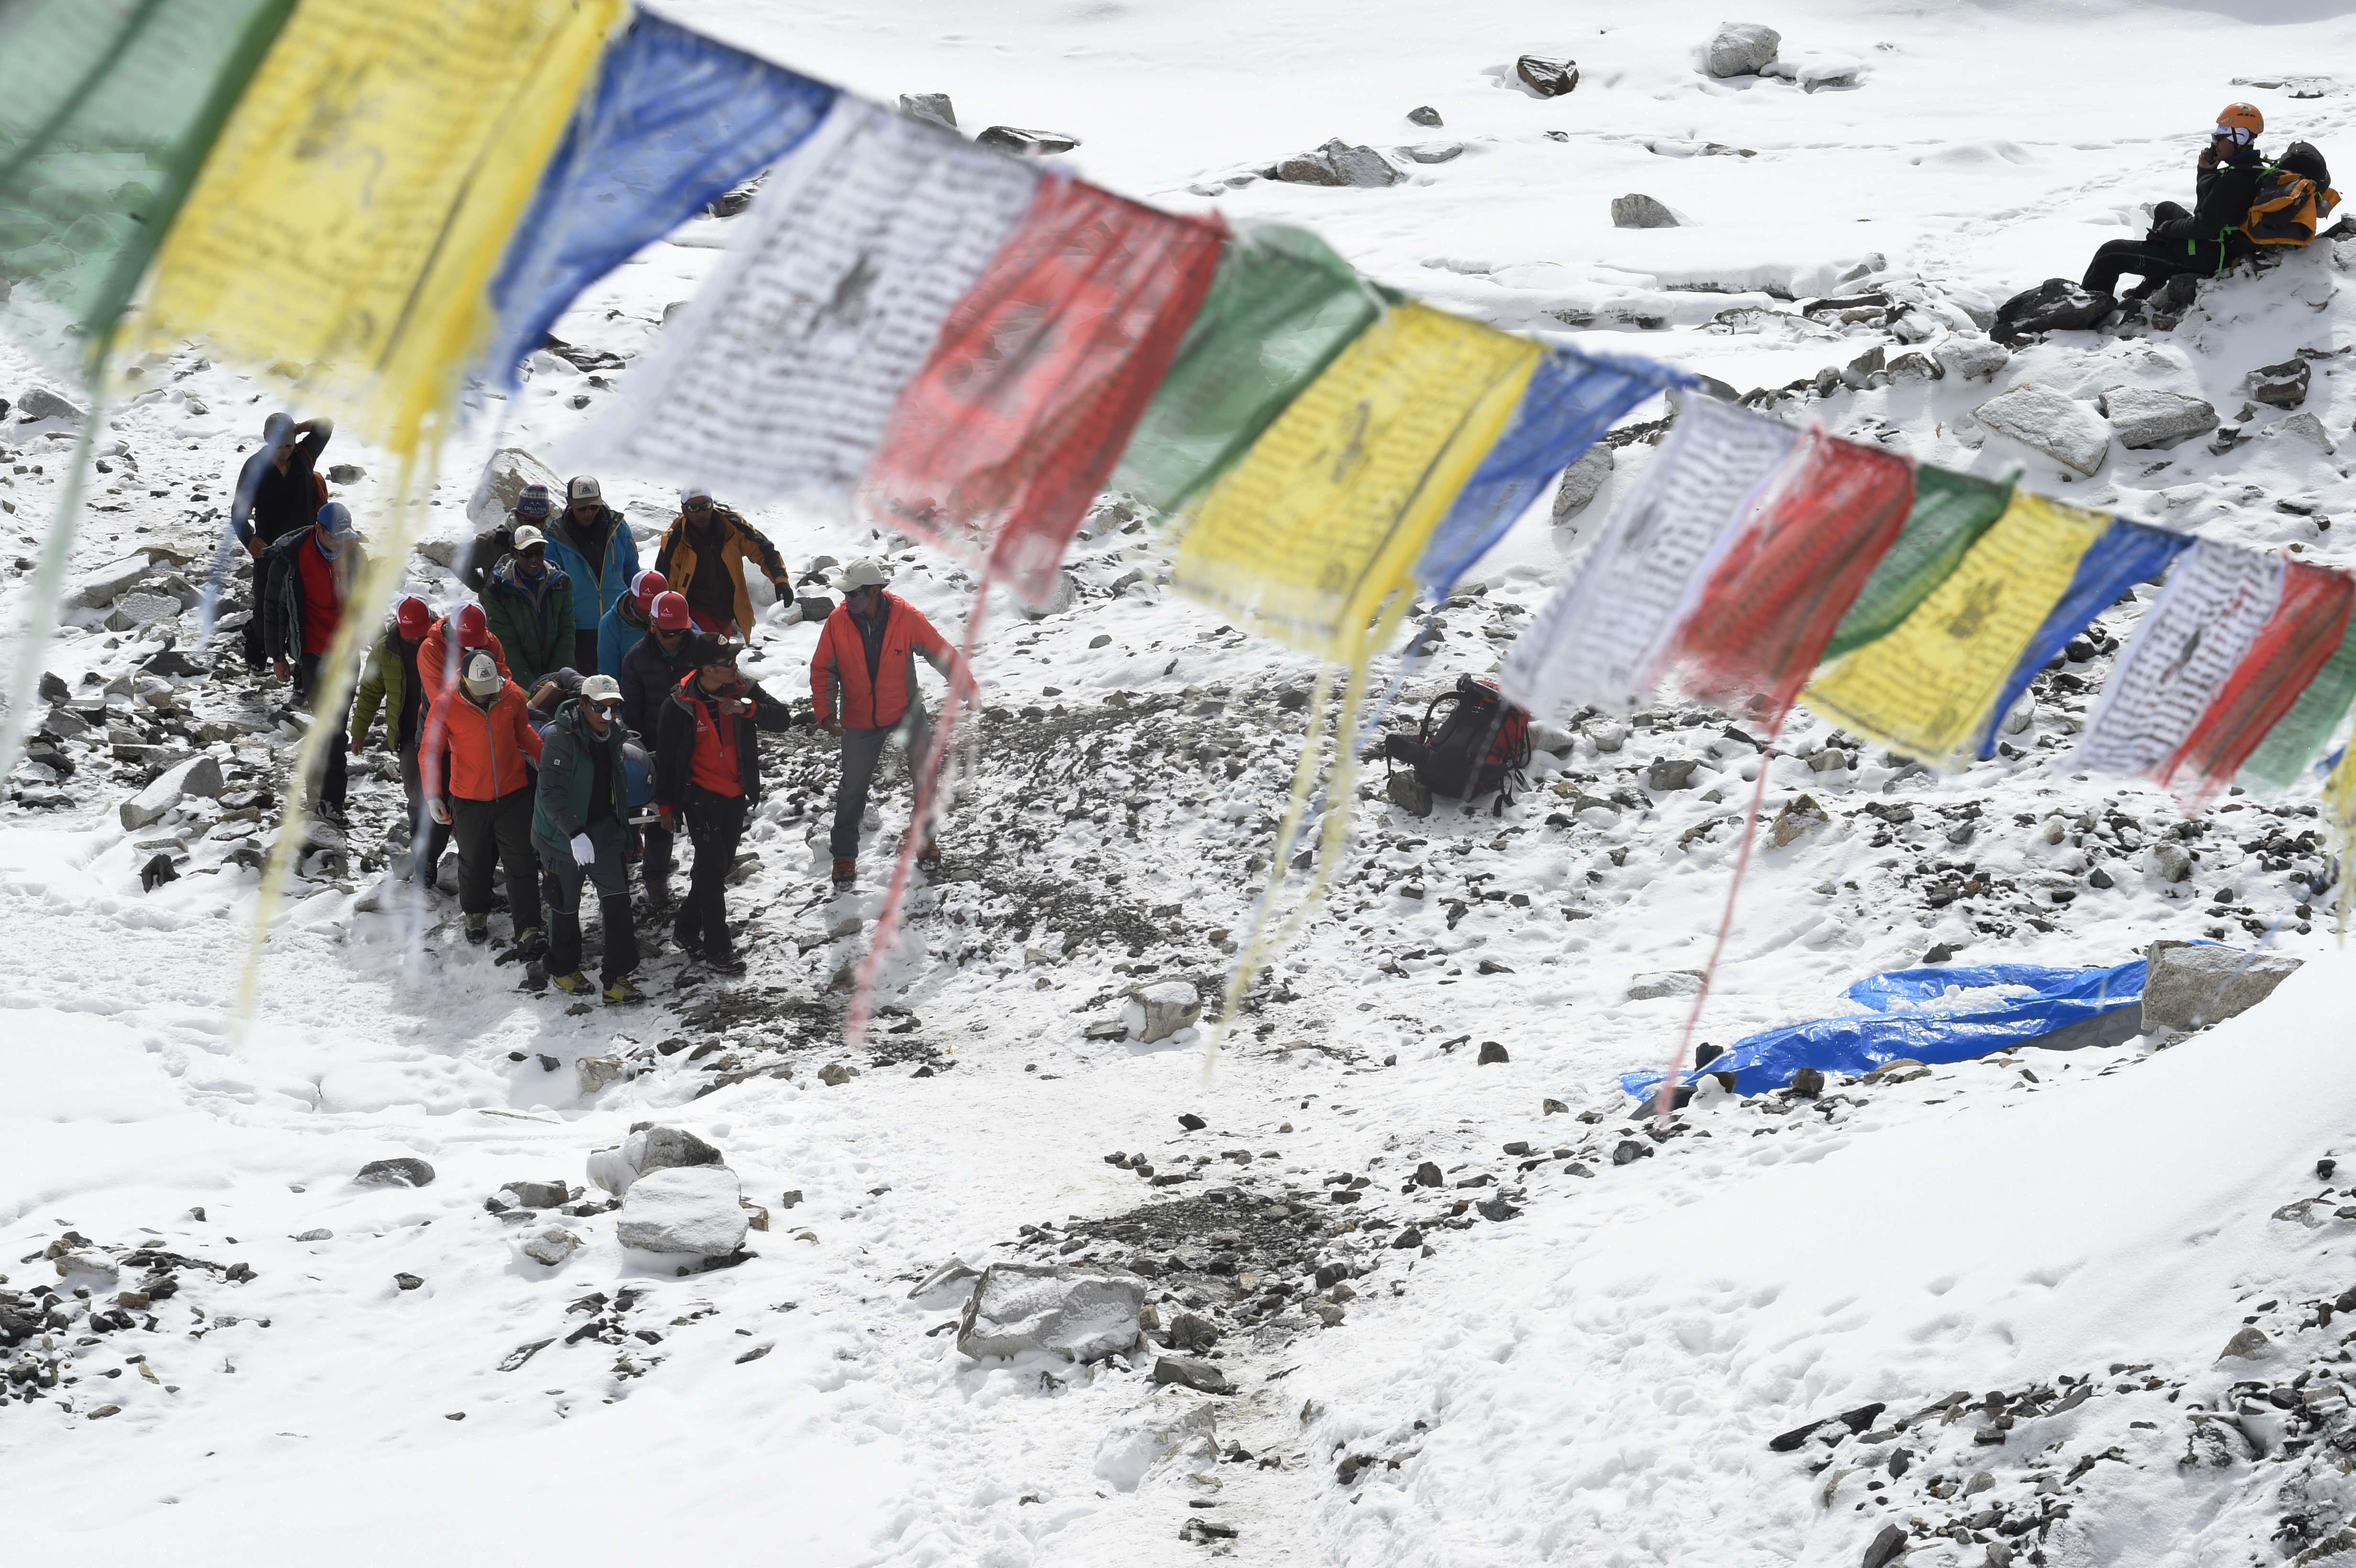 Rescue team personnel carry an injured person towards a waiting rescue helicopter at Everest Base Camp on April 26, 2015, a day after an avalanche triggered by an earthquake devastated the camp. Rescuers in Nepal are searching frantically for survivors of a huge quake on April 25, that killed nearly 2,000, digging through rubble in the devastated capital Kathmandu and airlifting victims of an avalanche at Everest base camp. AFP PHOTO/ROBERTO SCHMIDT